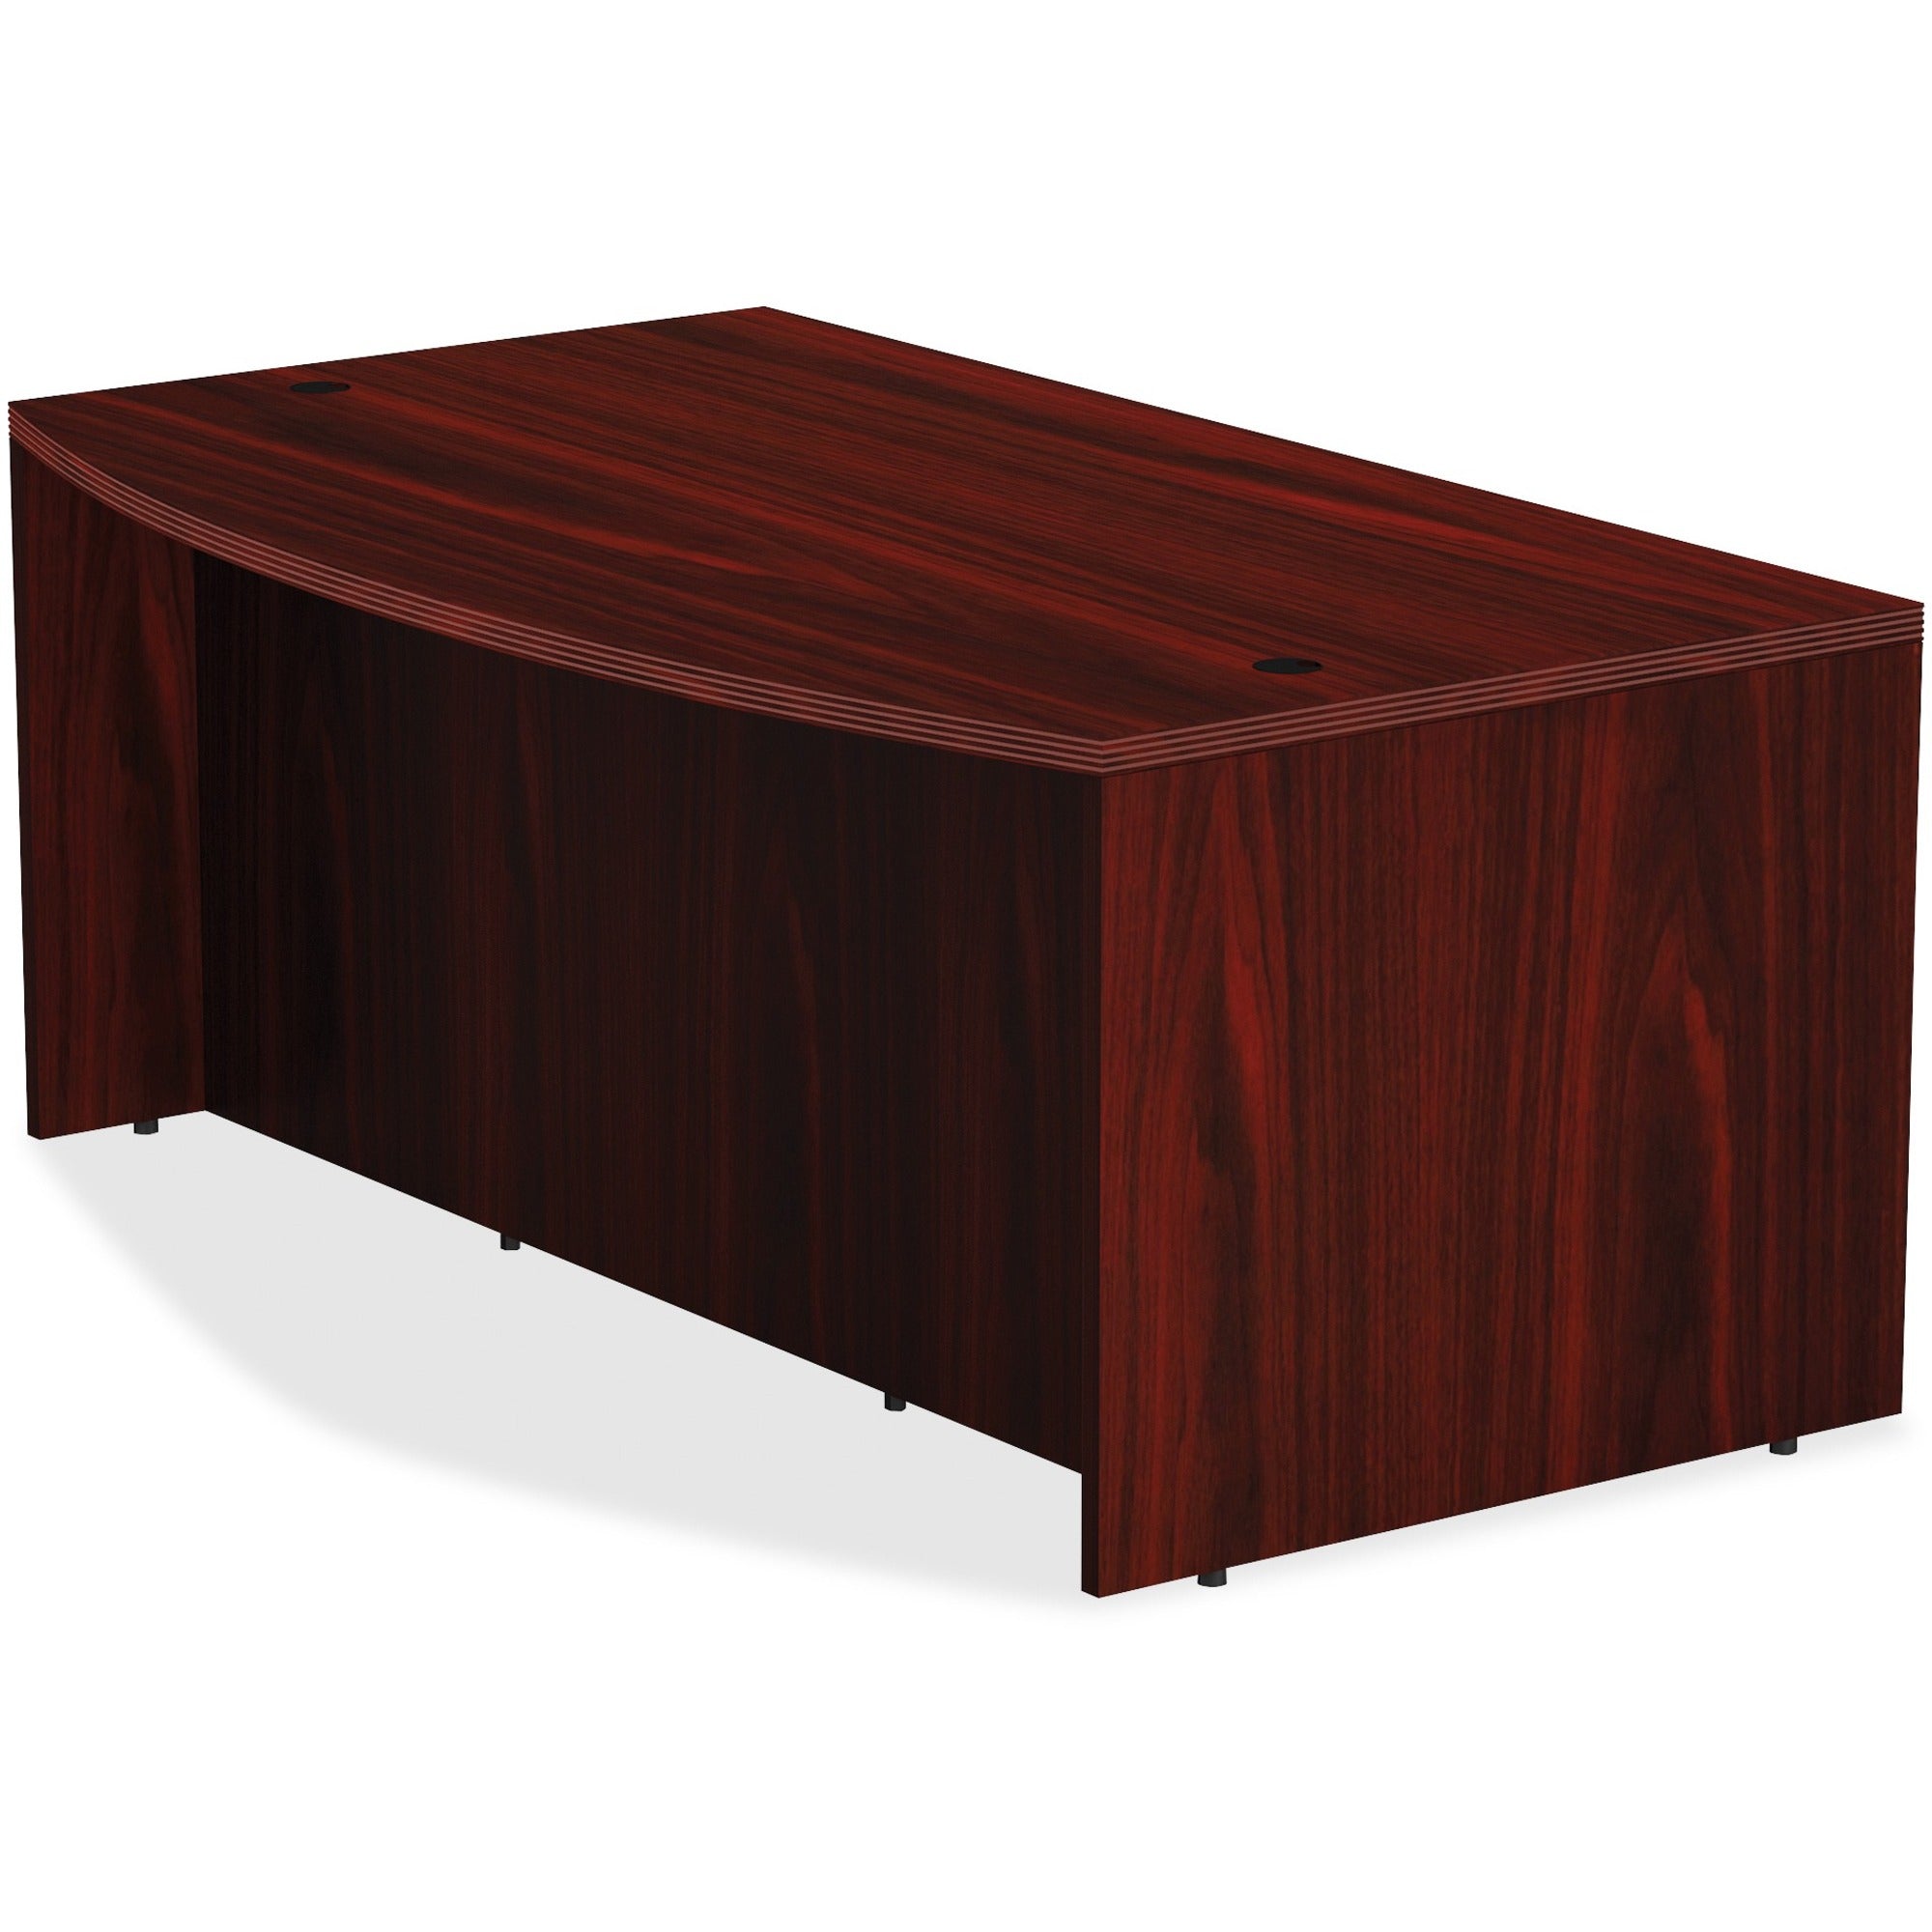 lorell-chateau-series-bowfront-desk-36-x-72295--15-top-reeded-edge_llr34348 - 1